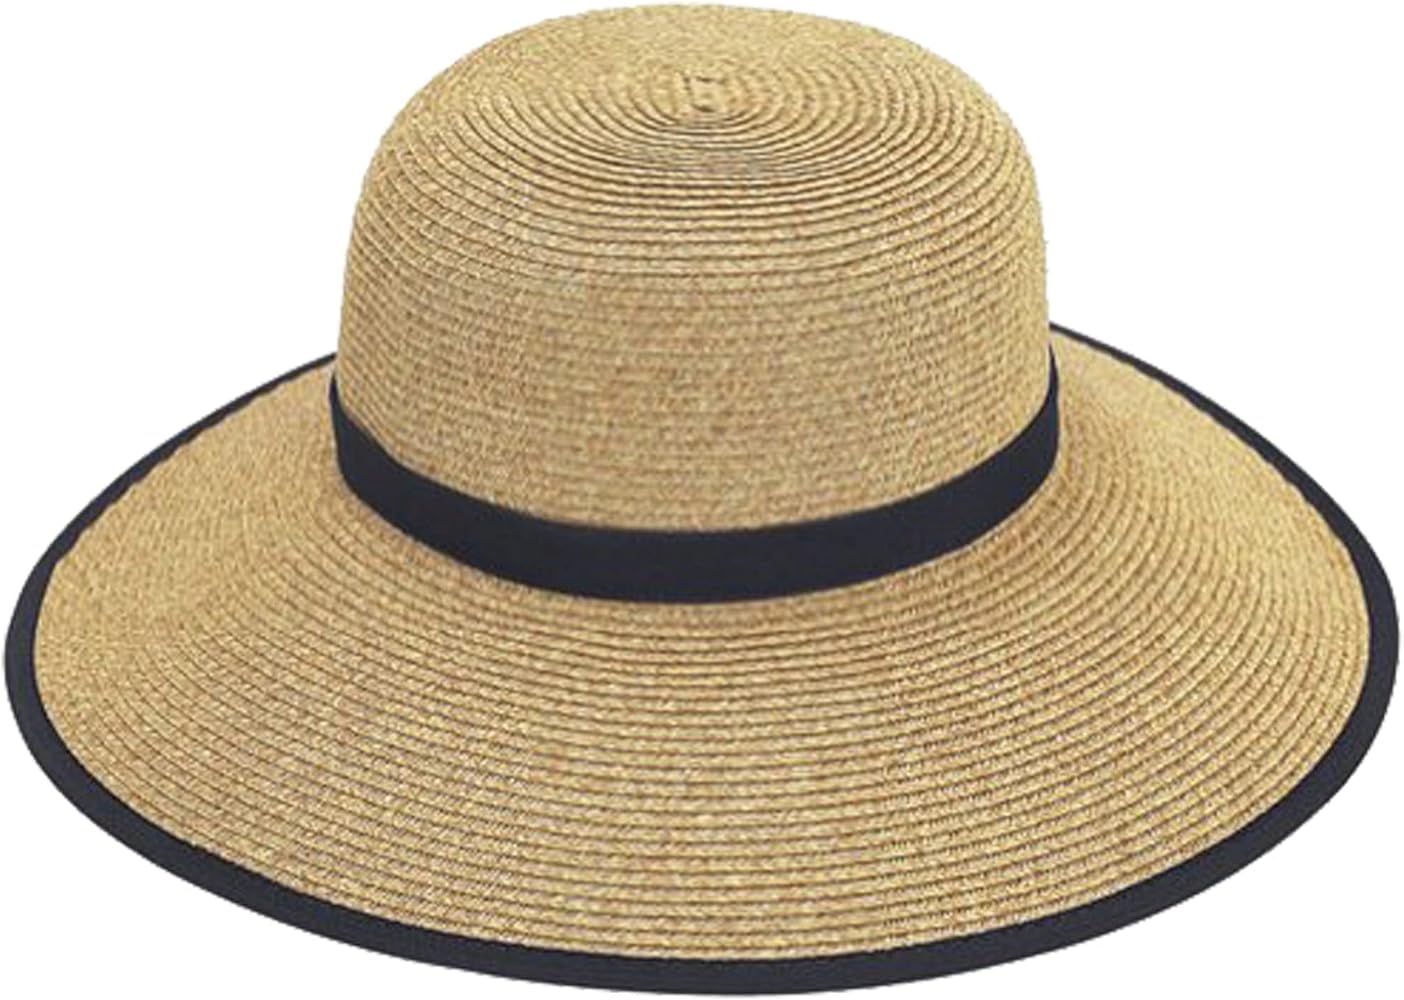 Sun 'N' Sand French Laundry Straw Sun Hats for Women - Backless, Foldable, and Packable Hat - Beach  | Amazon (US)